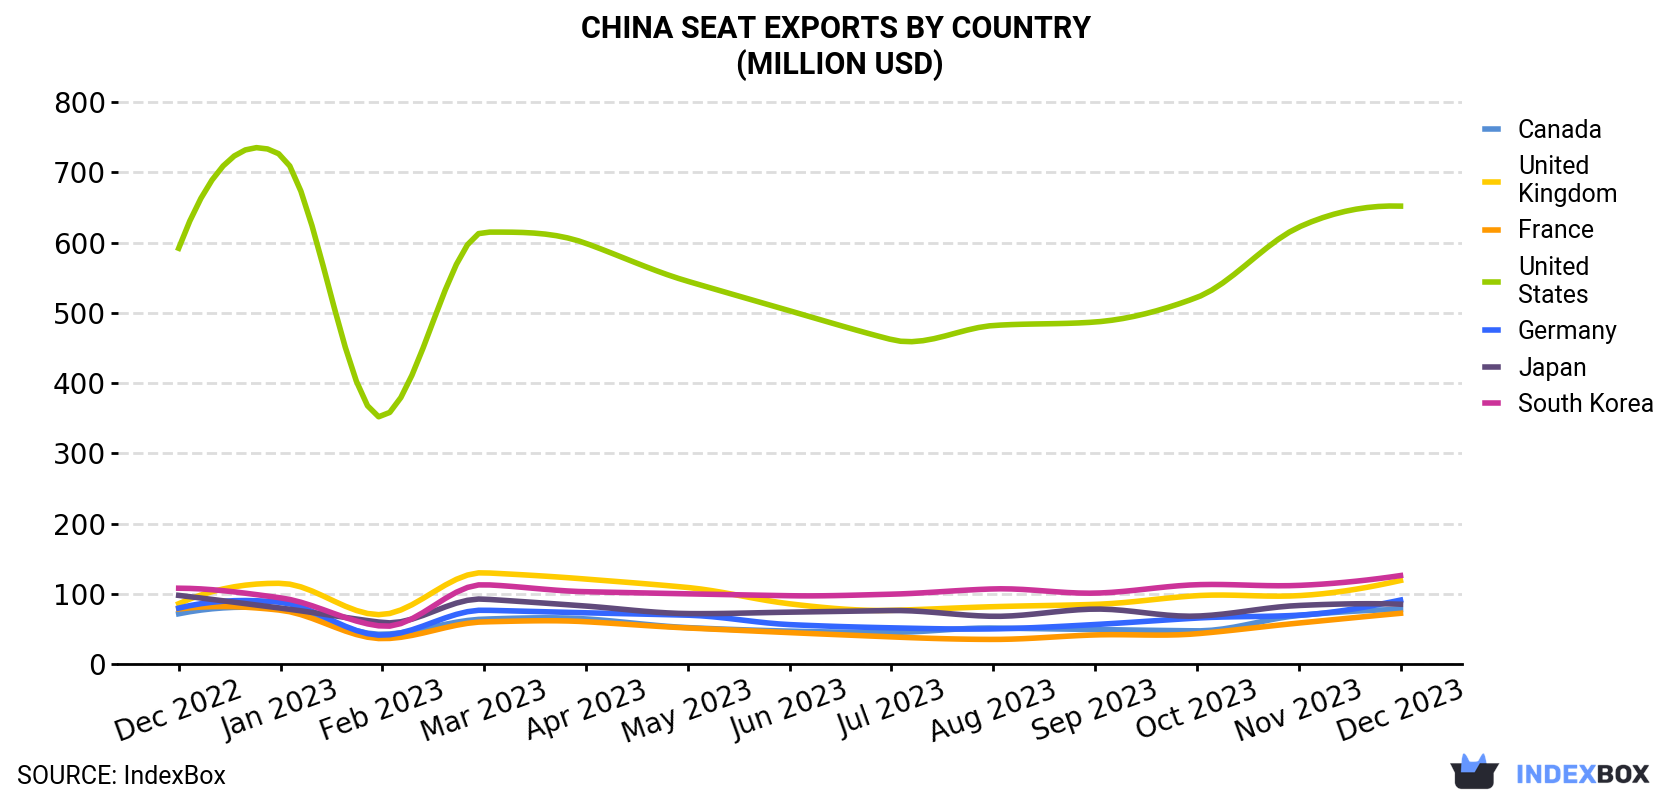 China Seat Exports By Country (Million USD)